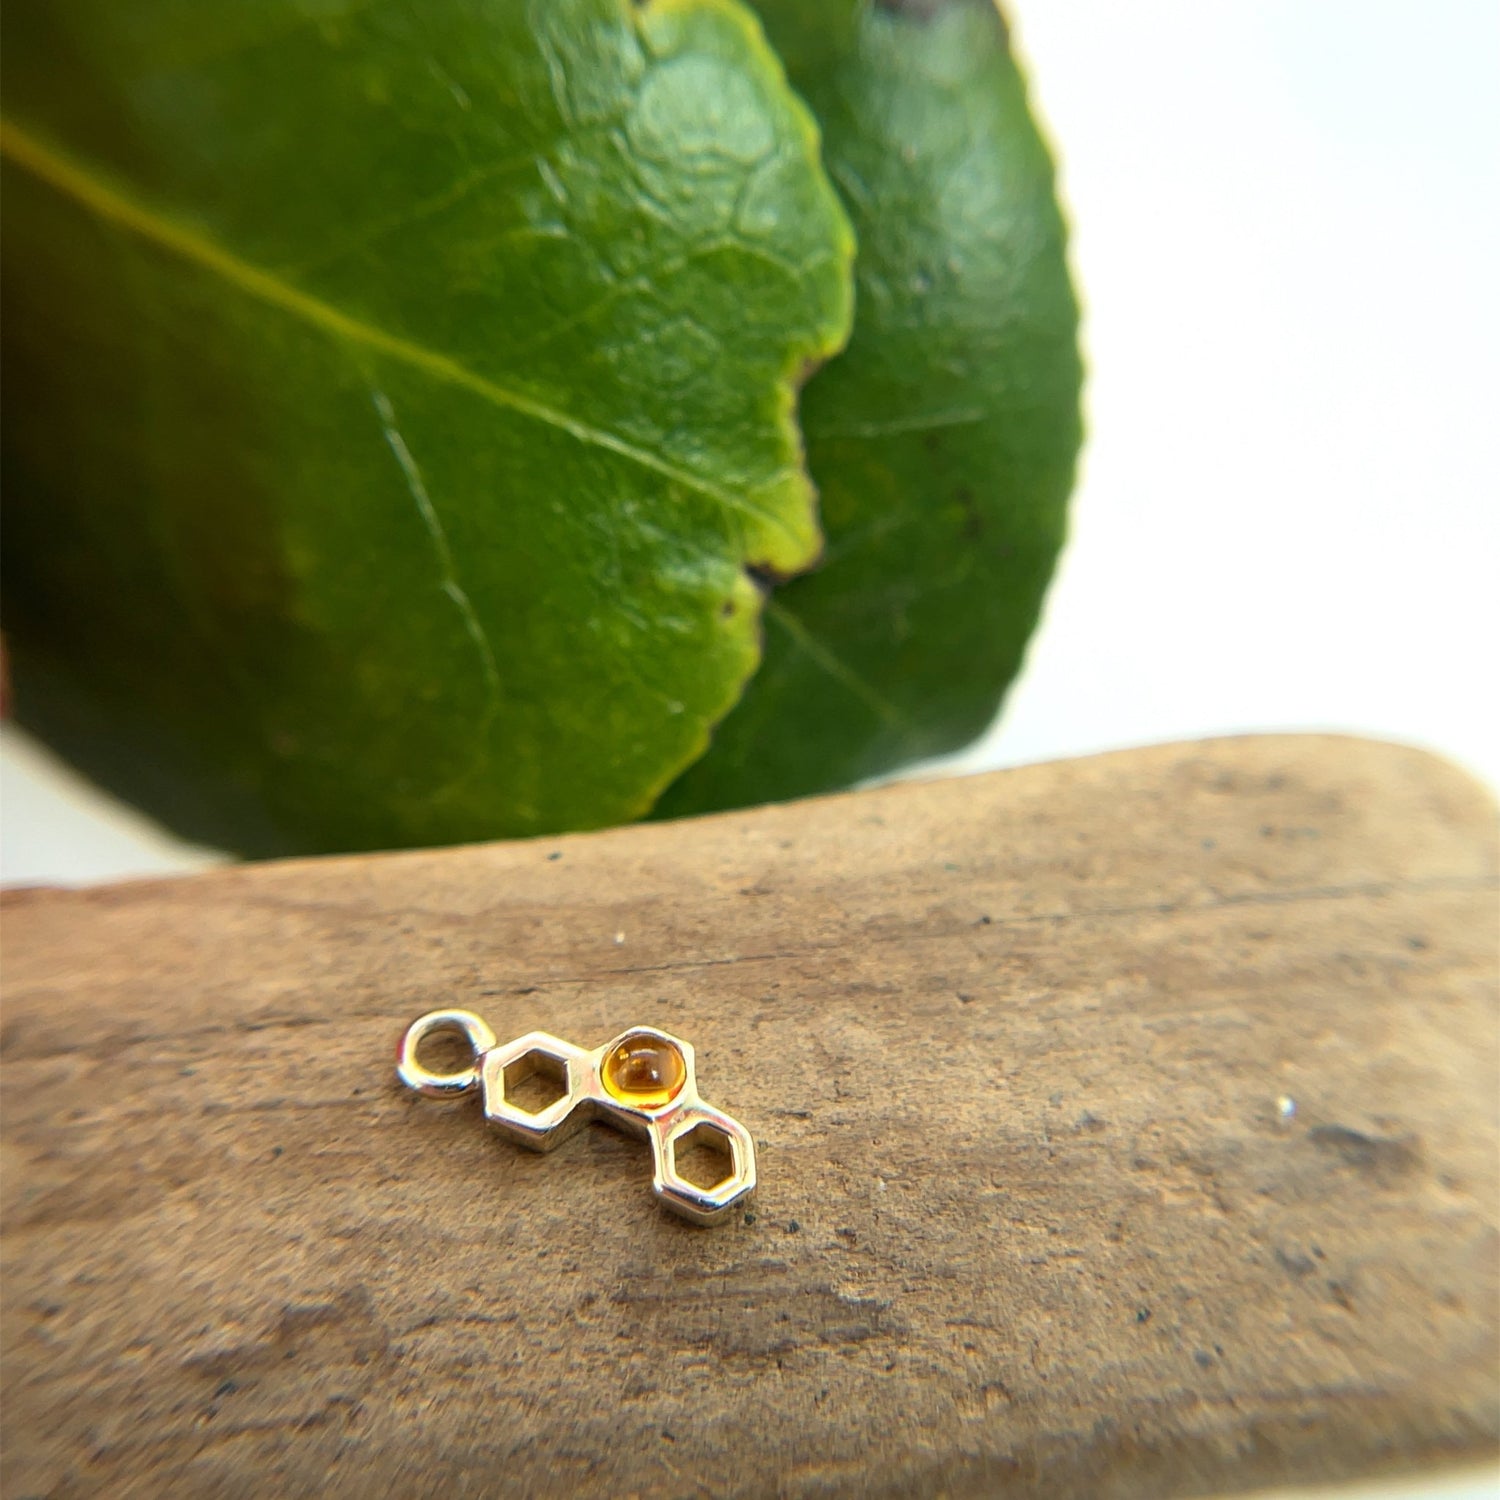 16g Charm with 7mm Honeycomb with Cabochon Center - Agave in Bloom